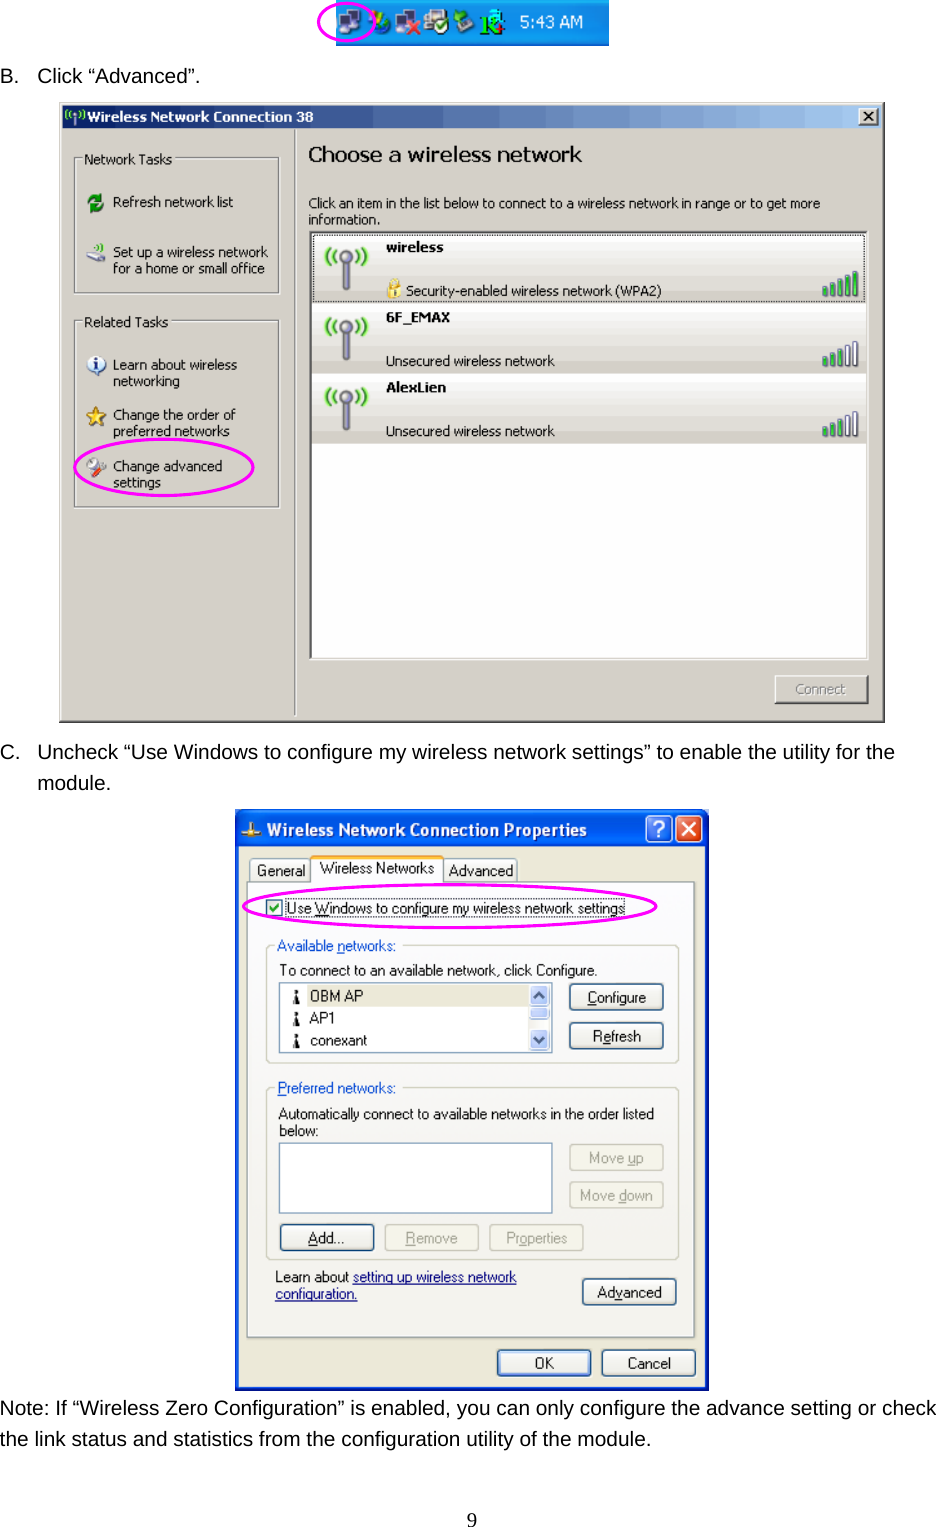  9  B. Click “Advanced”.  C.  Uncheck “Use Windows to configure my wireless network settings” to enable the utility for the module.  Note: If “Wireless Zero Configuration” is enabled, you can only configure the advance setting or check the link status and statistics from the configuration utility of the module.  